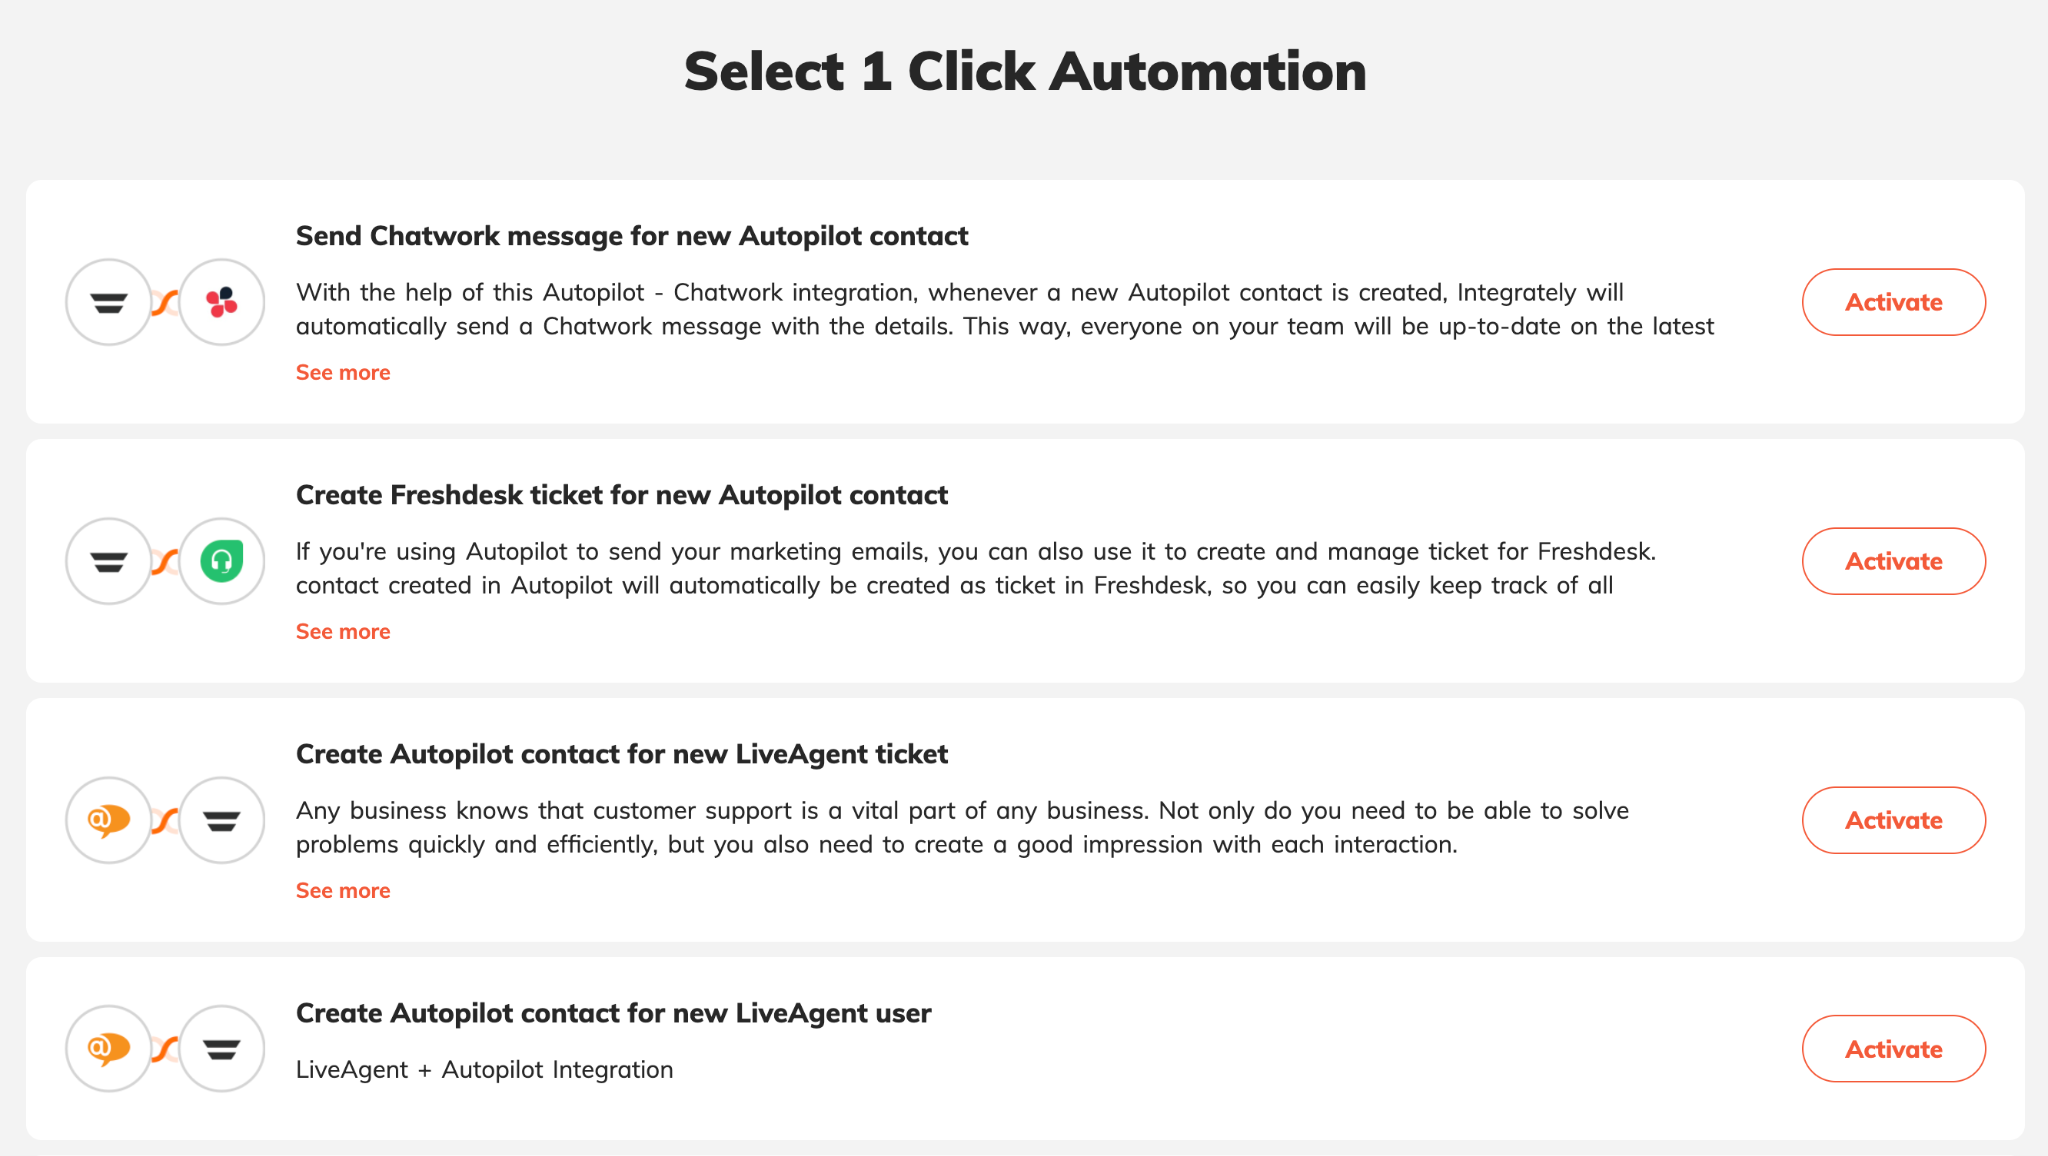 Integrately one click automation